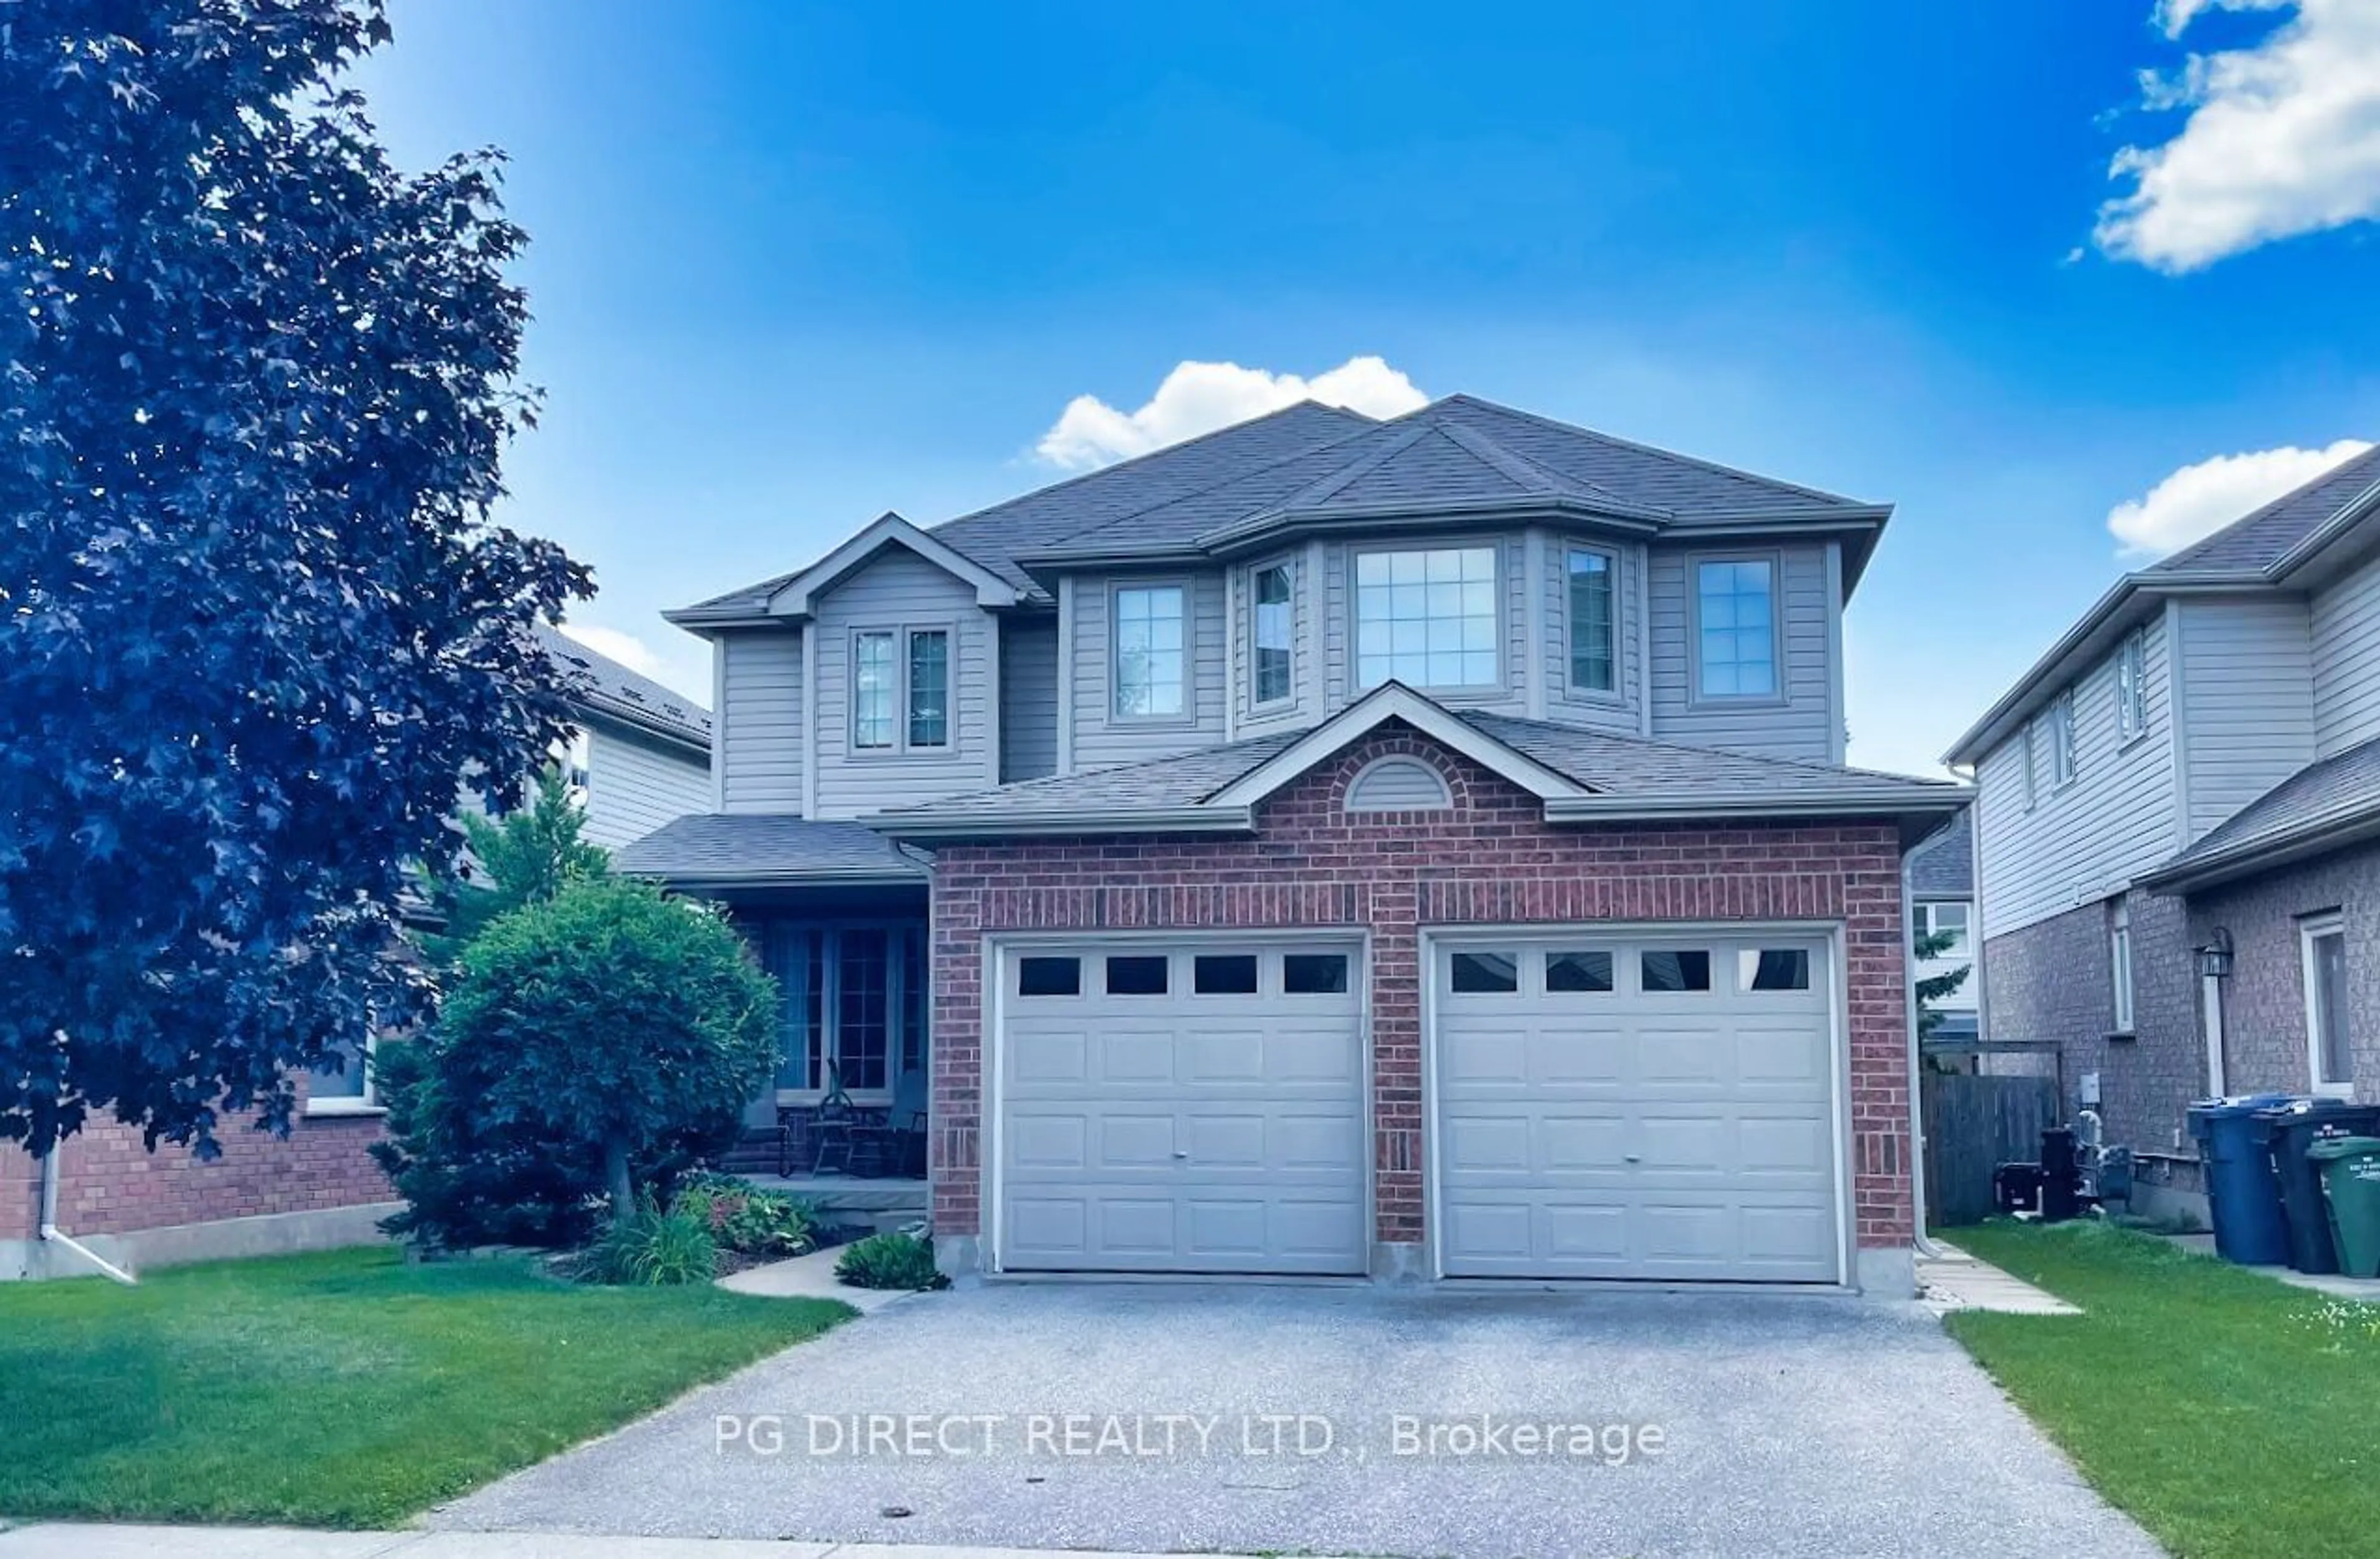 Home with brick exterior material for 33 Brown St, Guelph Ontario N1L 1R2